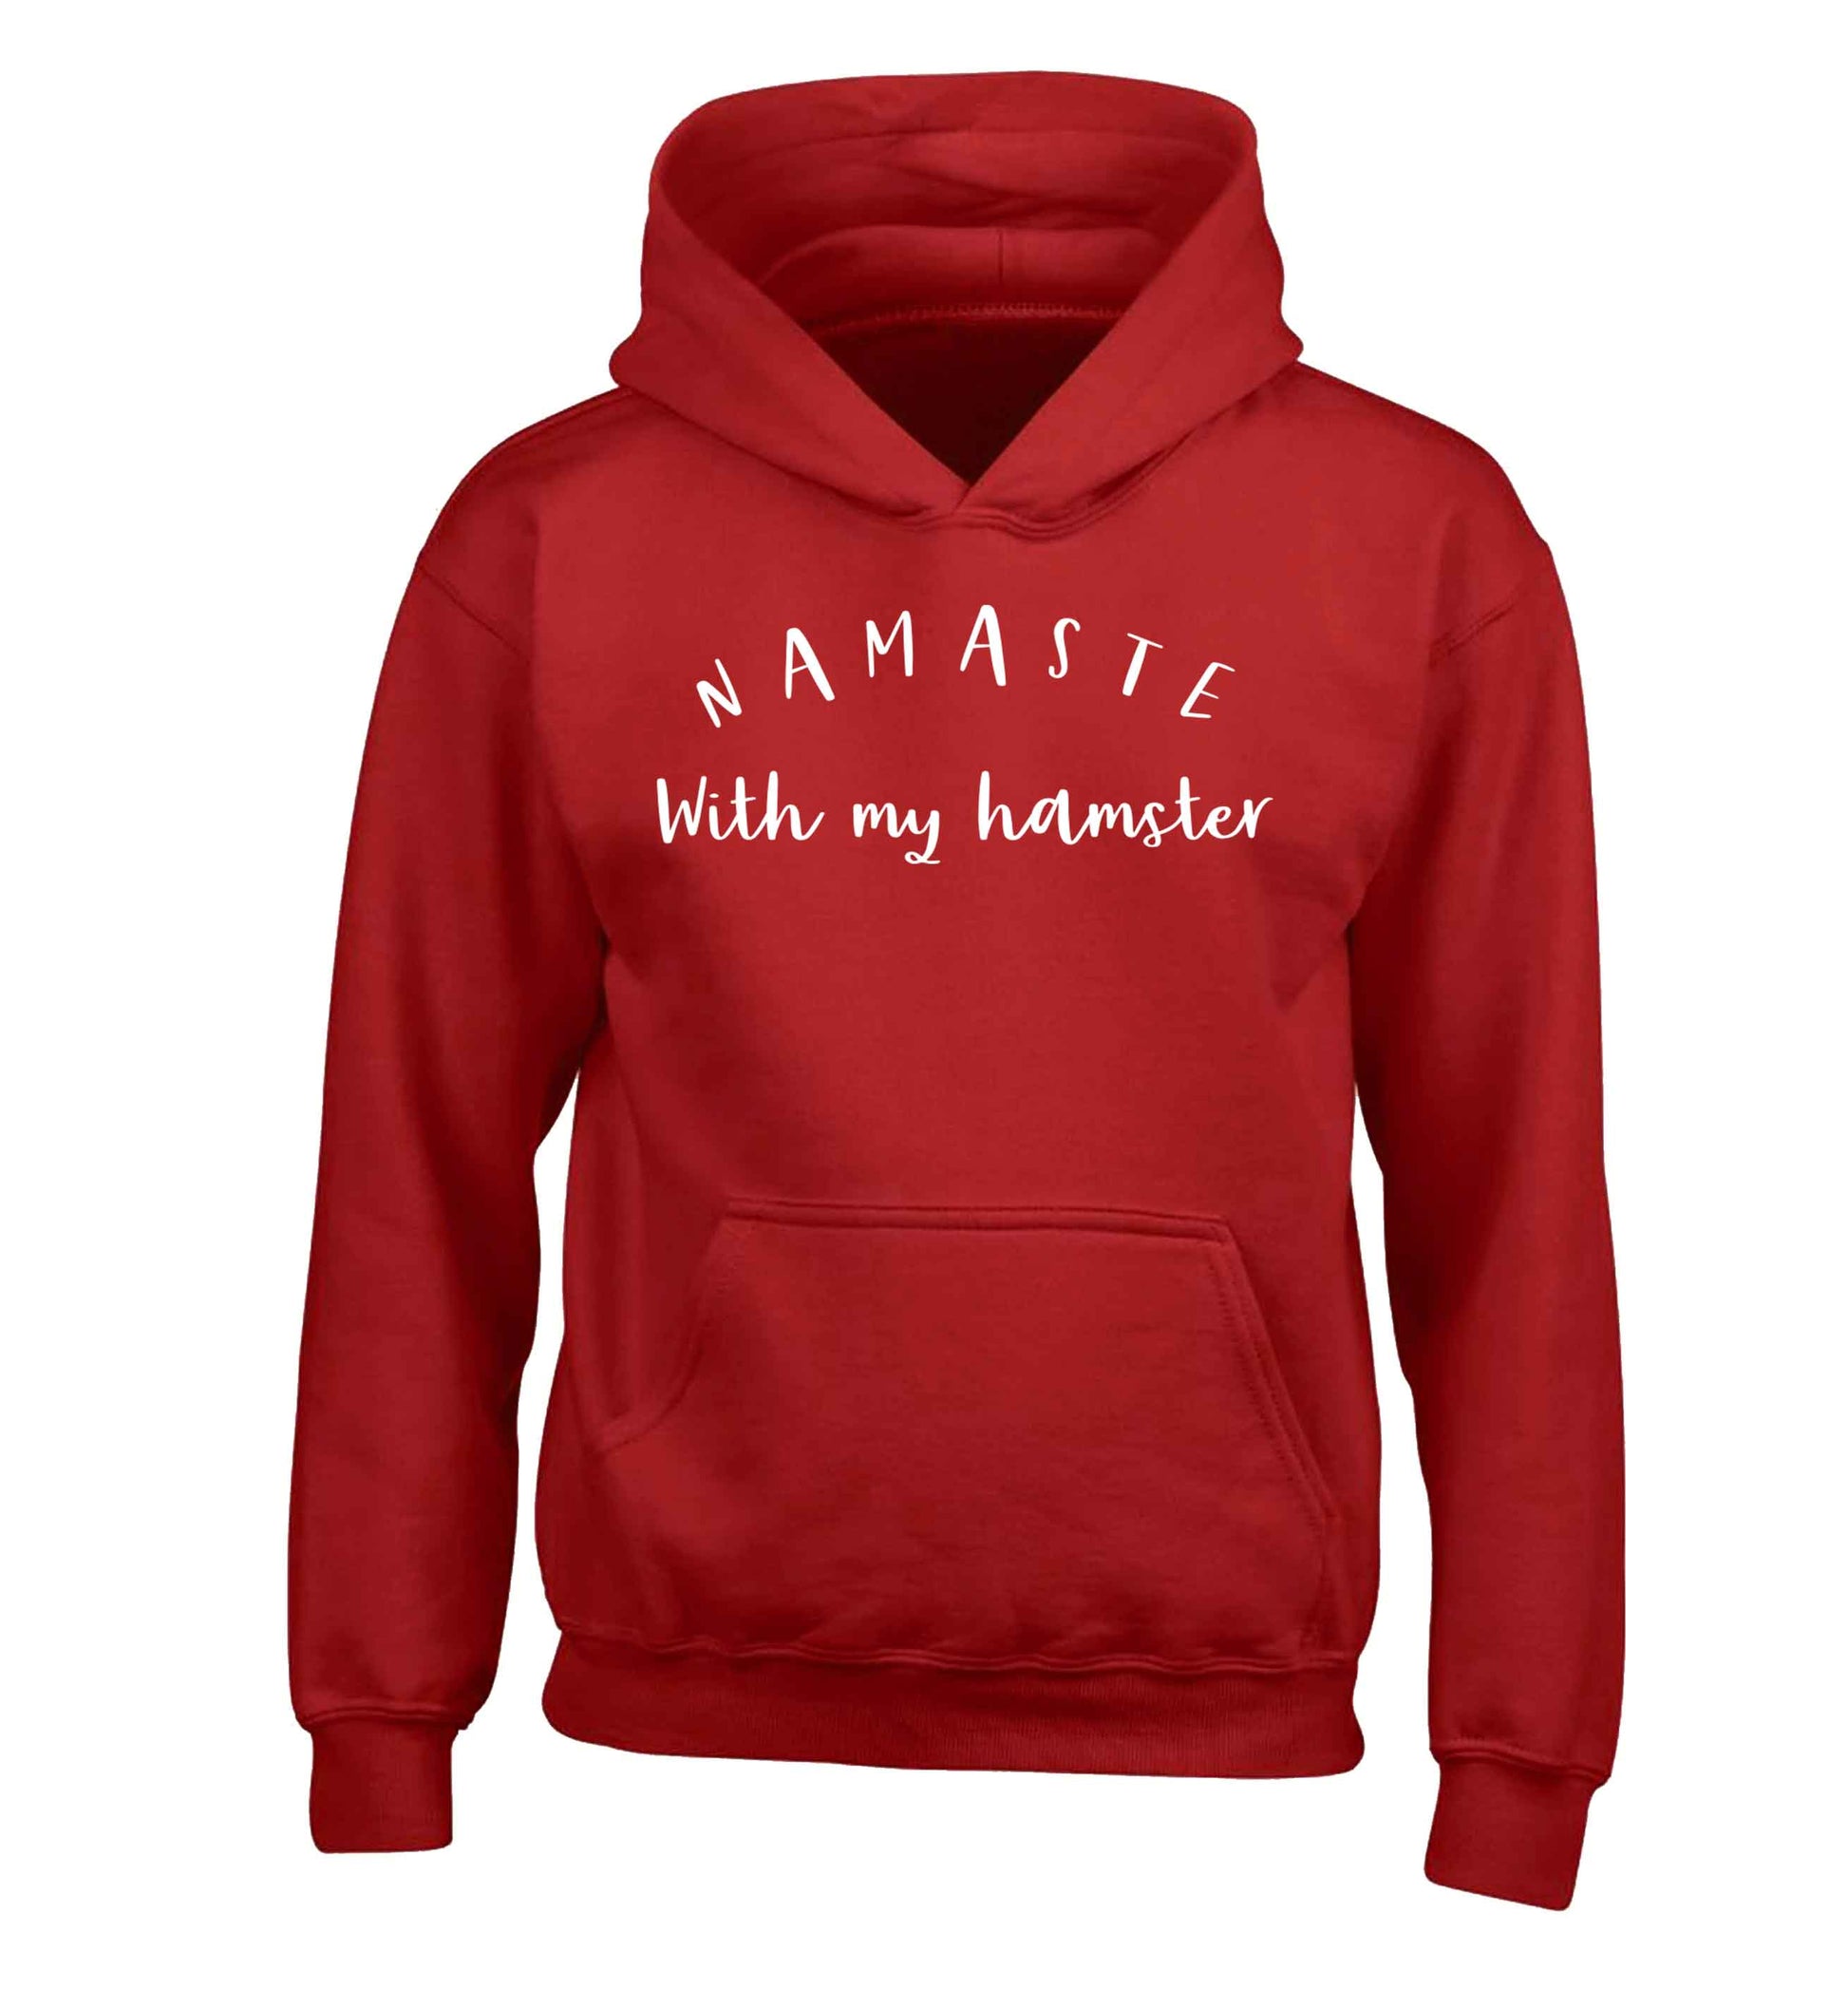 Namaste with my hamster children's red hoodie 12-13 Years